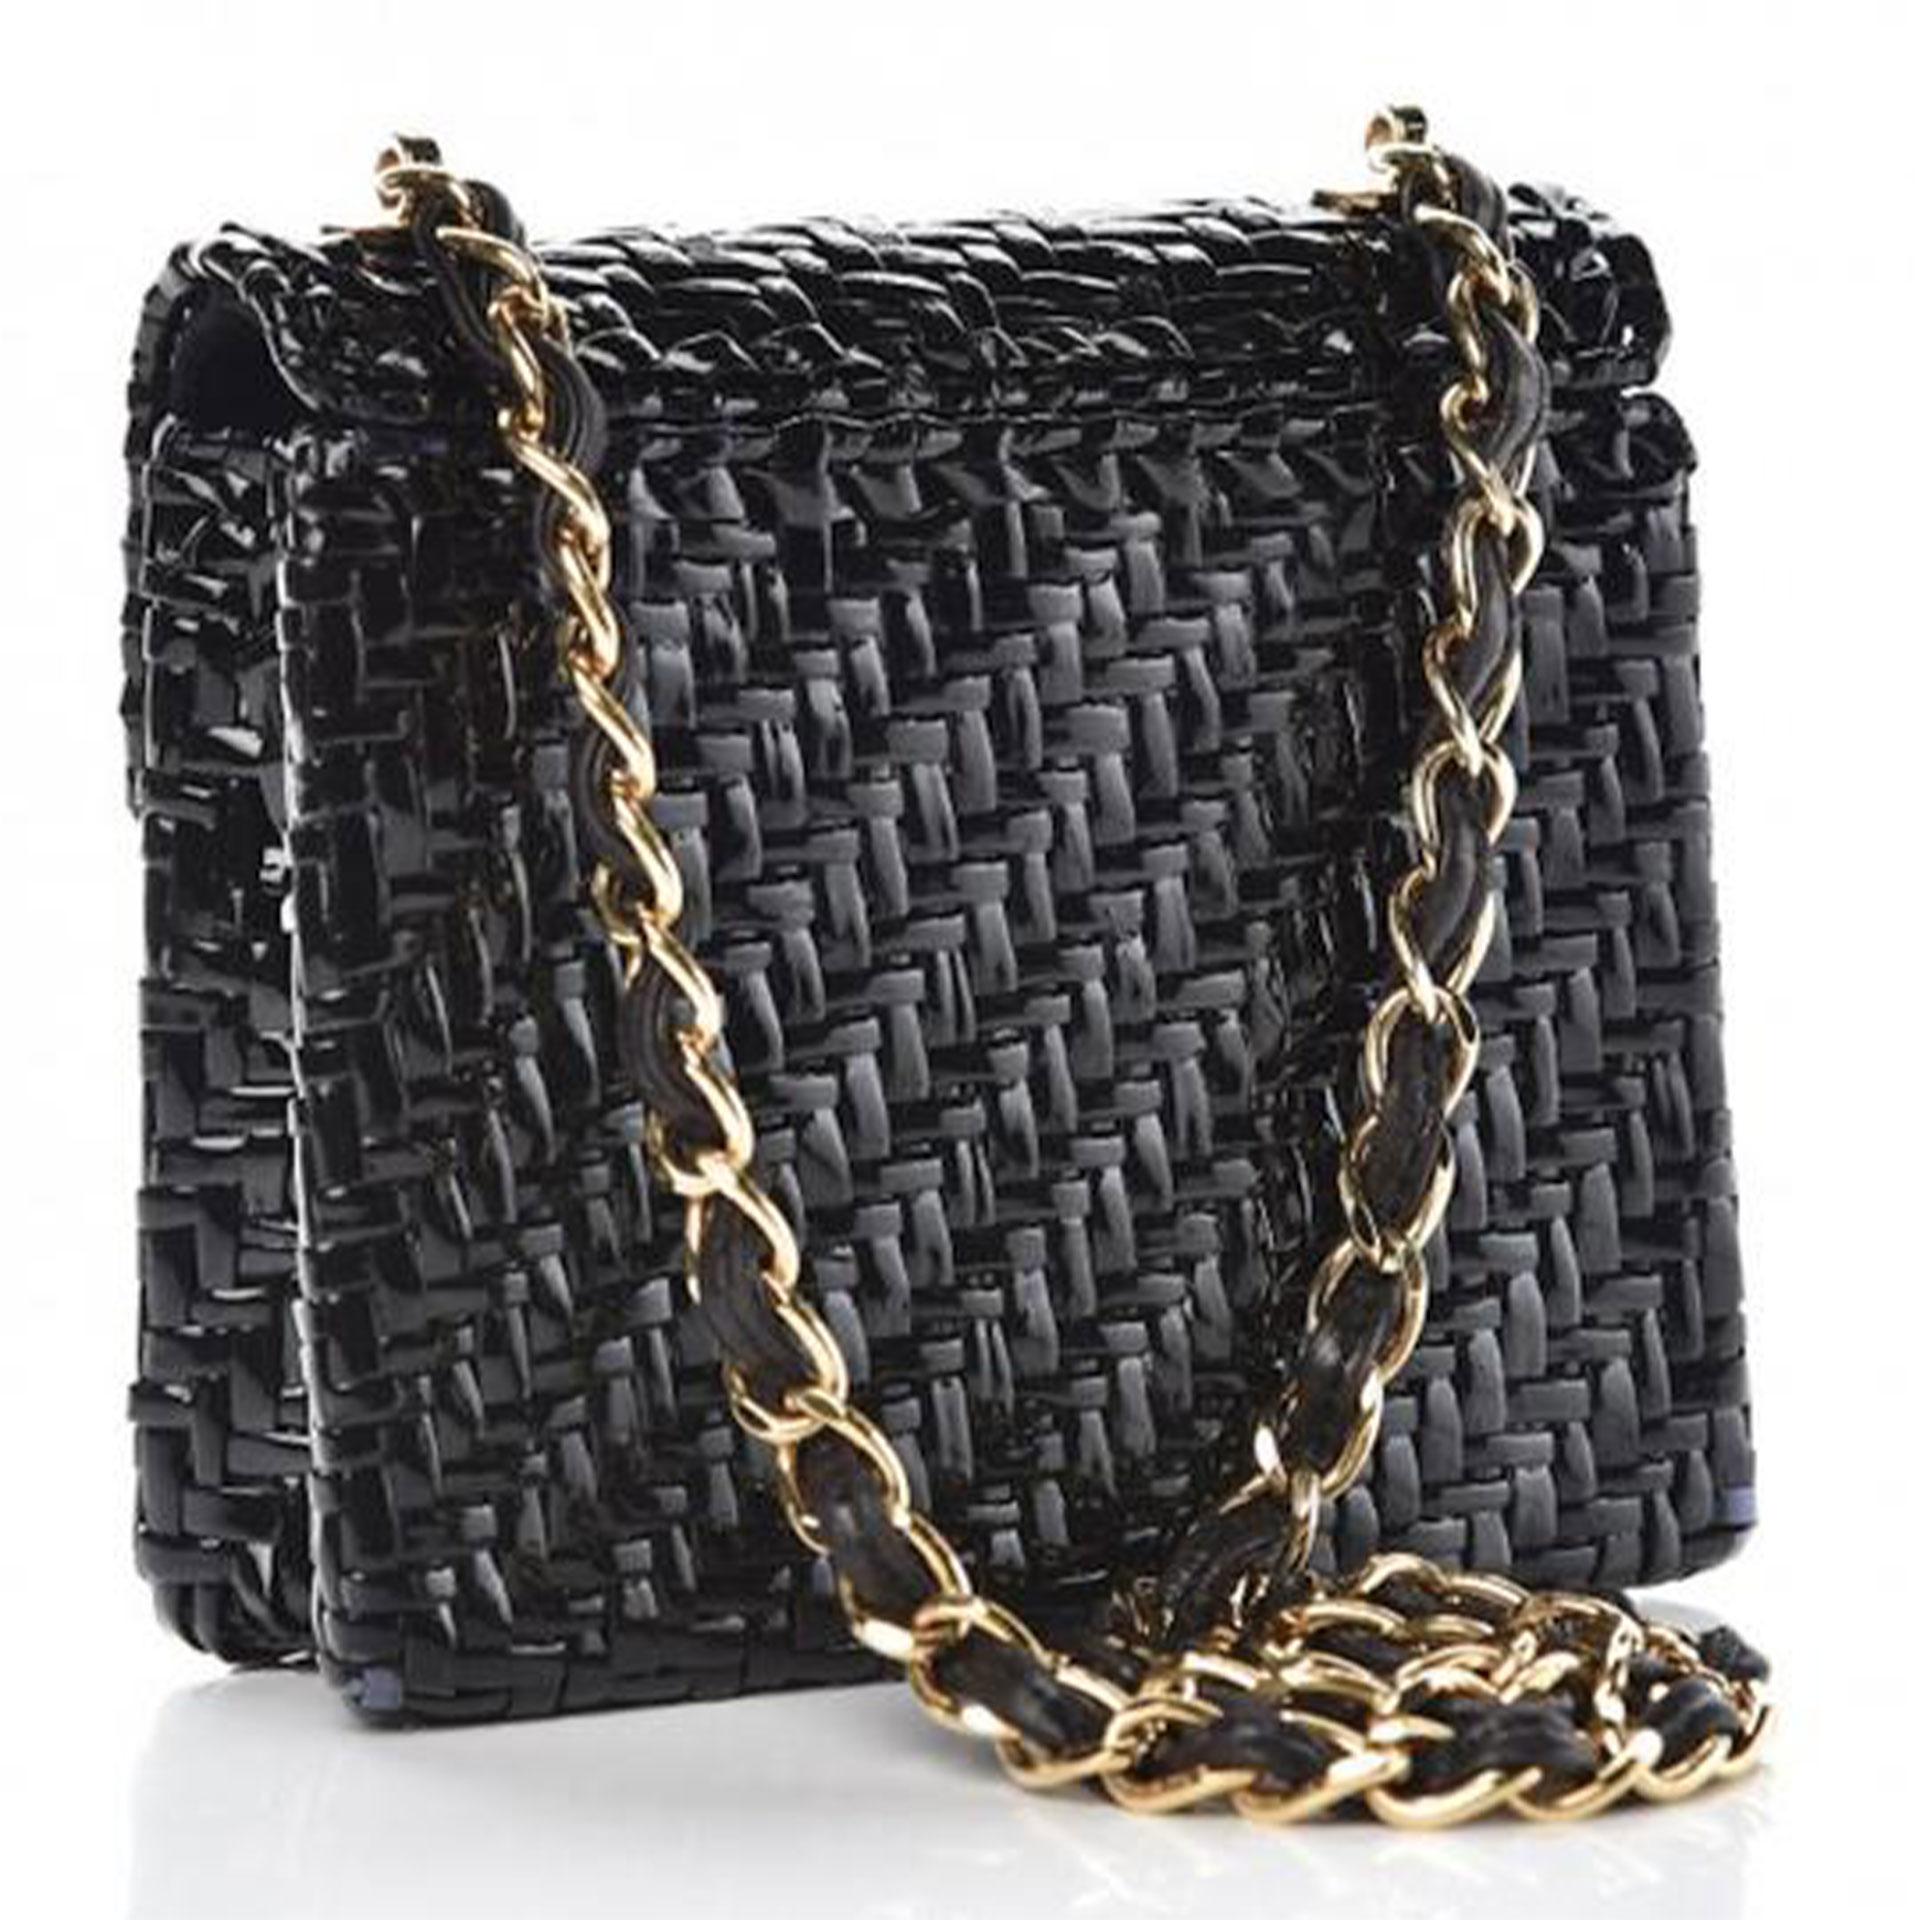 Chanel Flap Vintage Mini Wicker Raffia Classic Black Rattan Cross Body Bag

2001
Gold hardware
Classic interwoven chain

The bag features a long gold chain link shoulder strap threaded with leather and a frontal half flap with a gold Chanel Classic